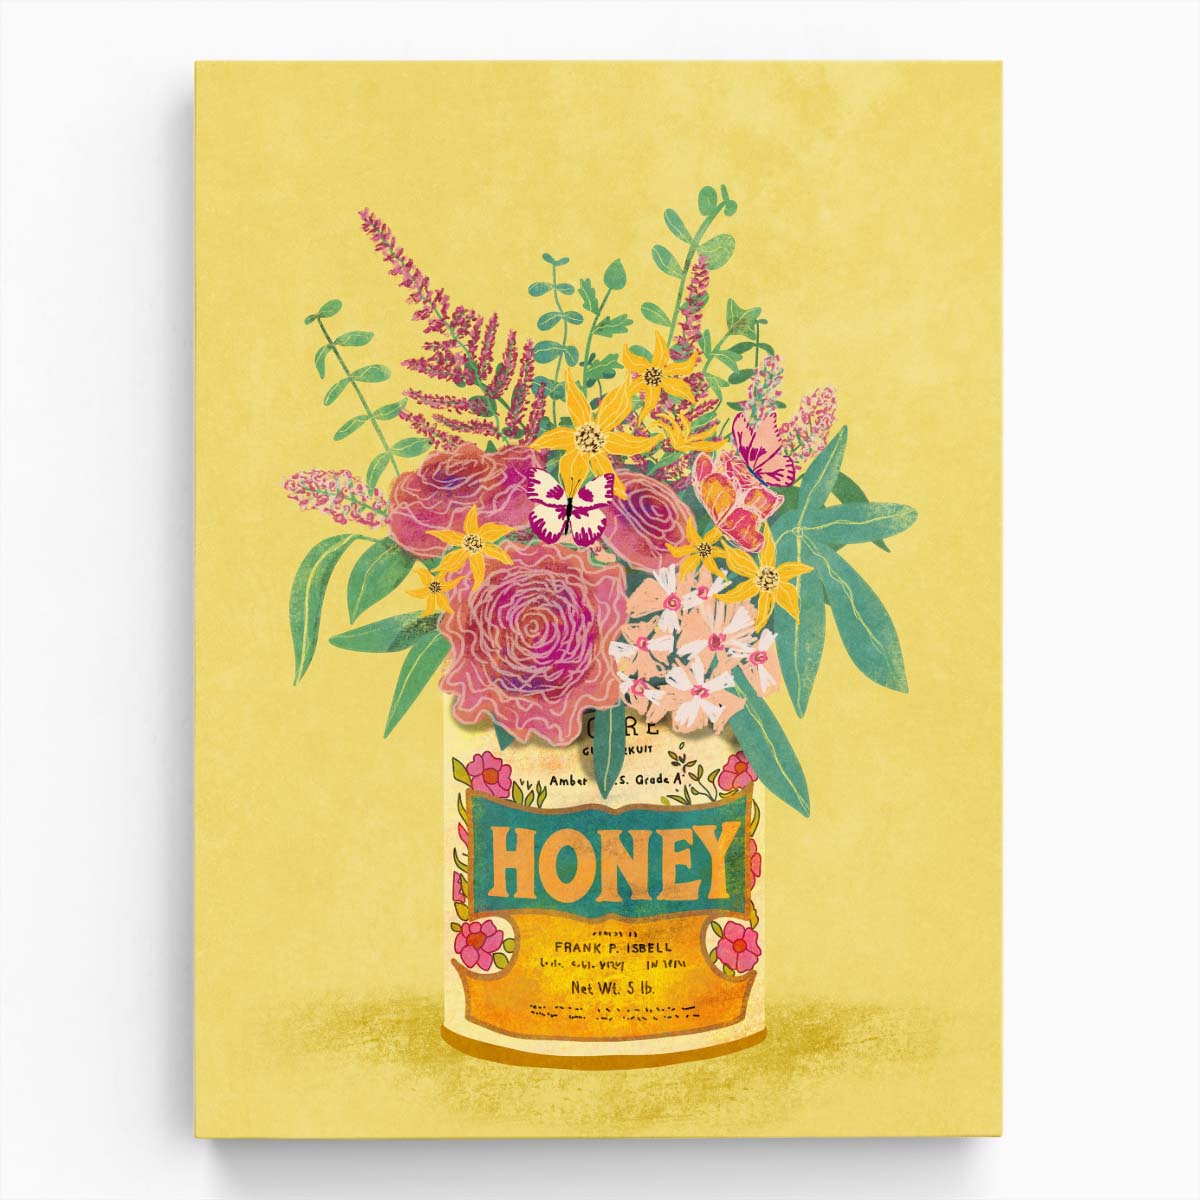 Vintage Botanical Illustration of Flowers in Honey Can by Raissa Oltmanns by Luxuriance Designs, made in USA